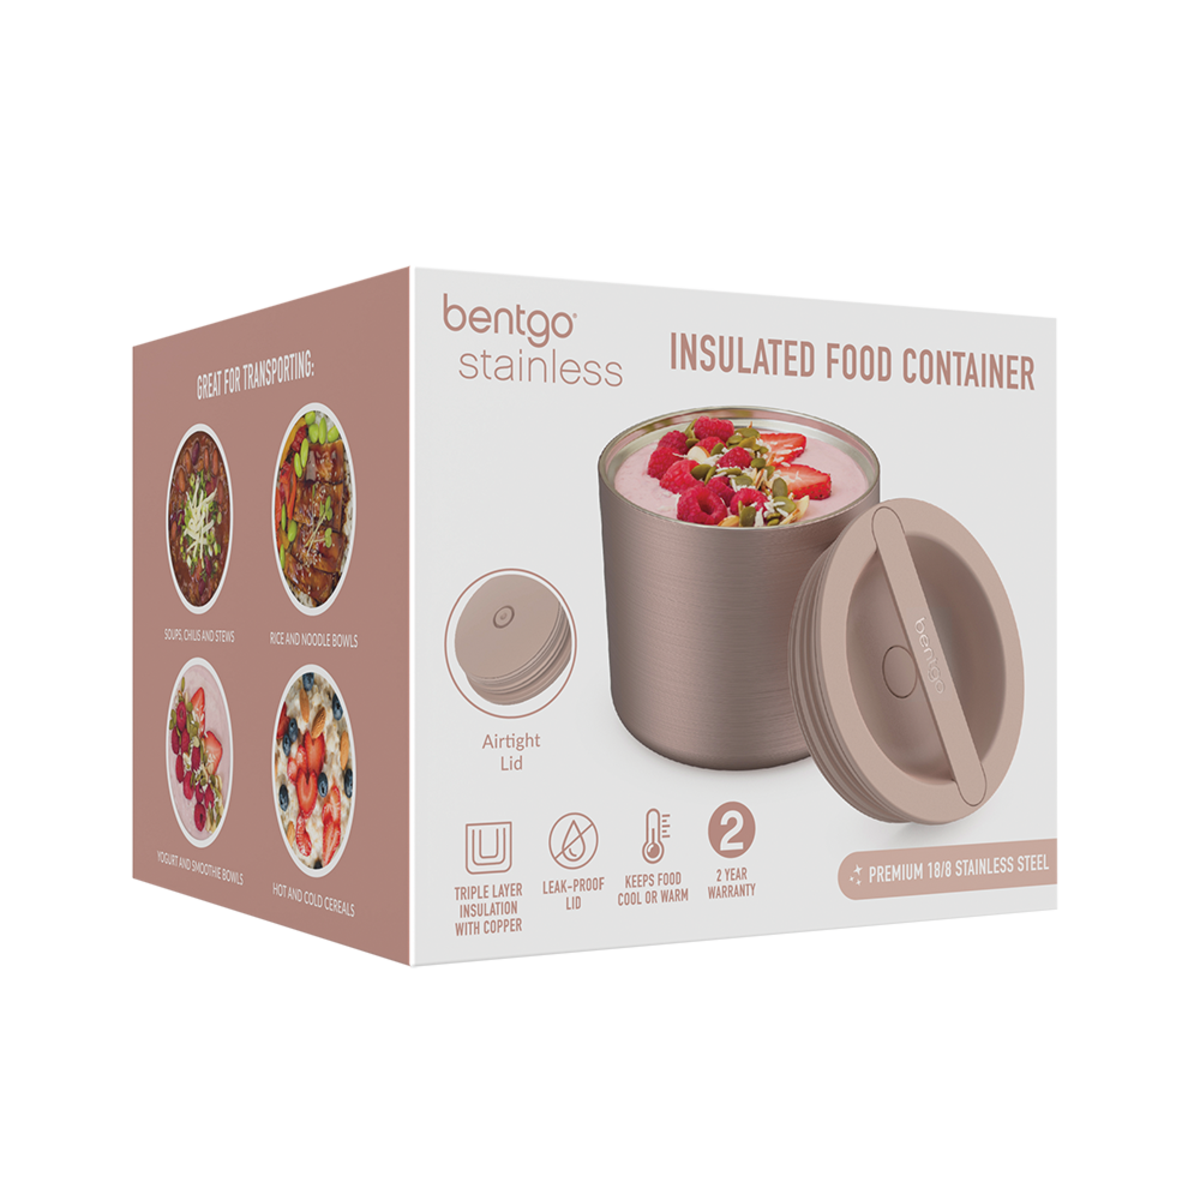 bentgo stainless steel insulated food container 560ml - rose gold